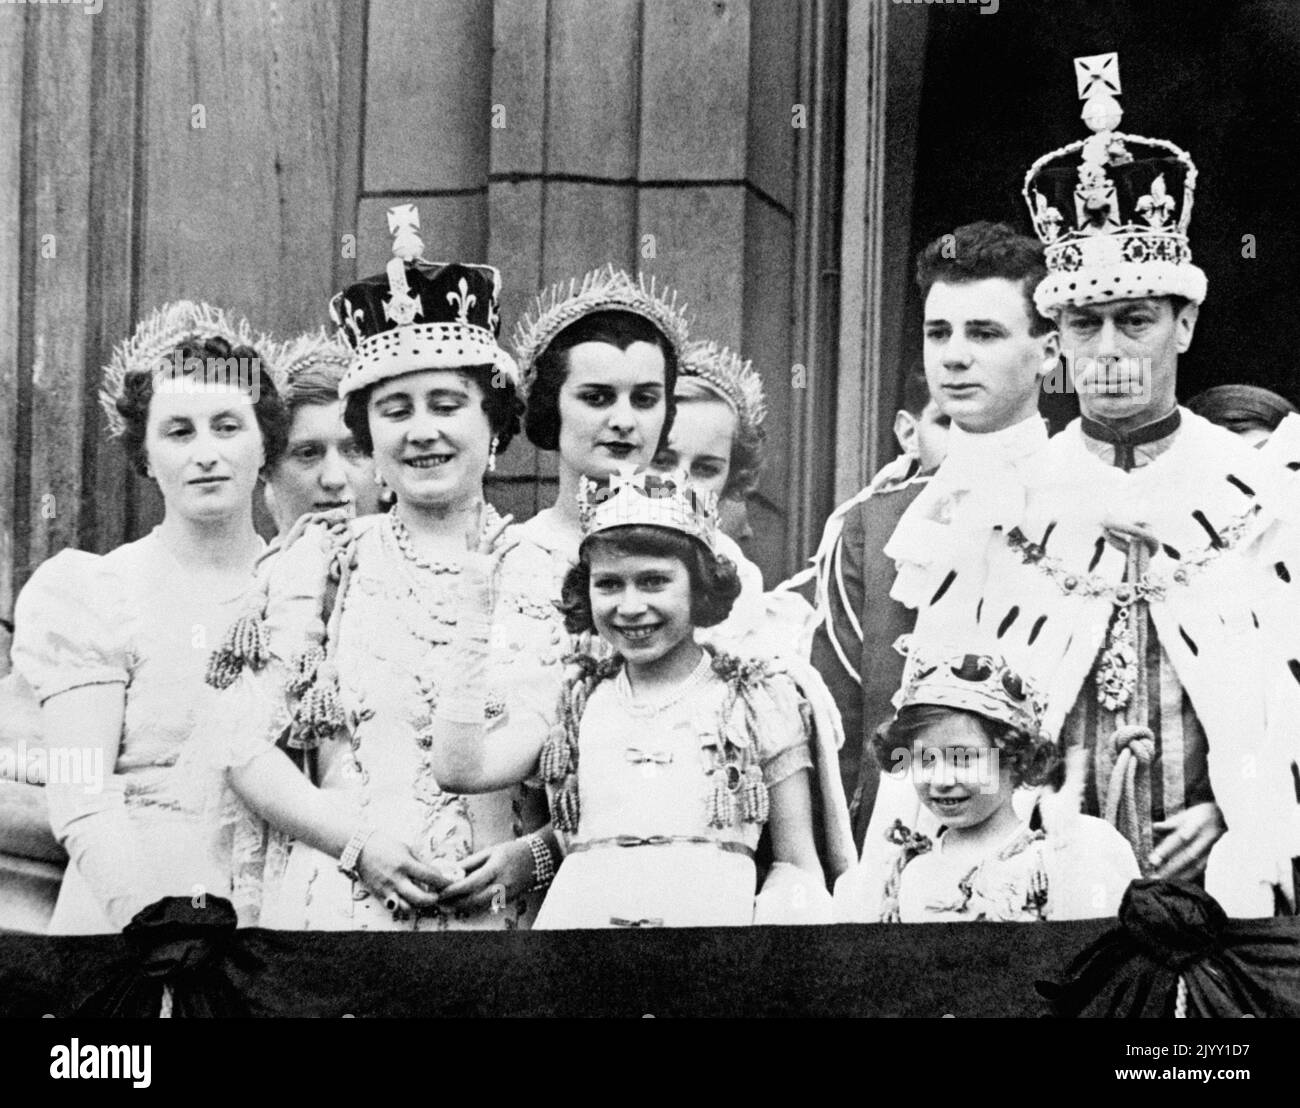 File photo dated 12/5/1937 of Queen Elizabeth (later the Queen Mother), Princess Elizabeth (later Queen Elizabeth II), Princess Margaret and King George VI after his coronation, on the balcony of Buckingham Palace, London. The Queen pledged at the age of 21 that she would serve as monarch for her entire life. Issue date: Thursday September 8, 2022. Stock Photo